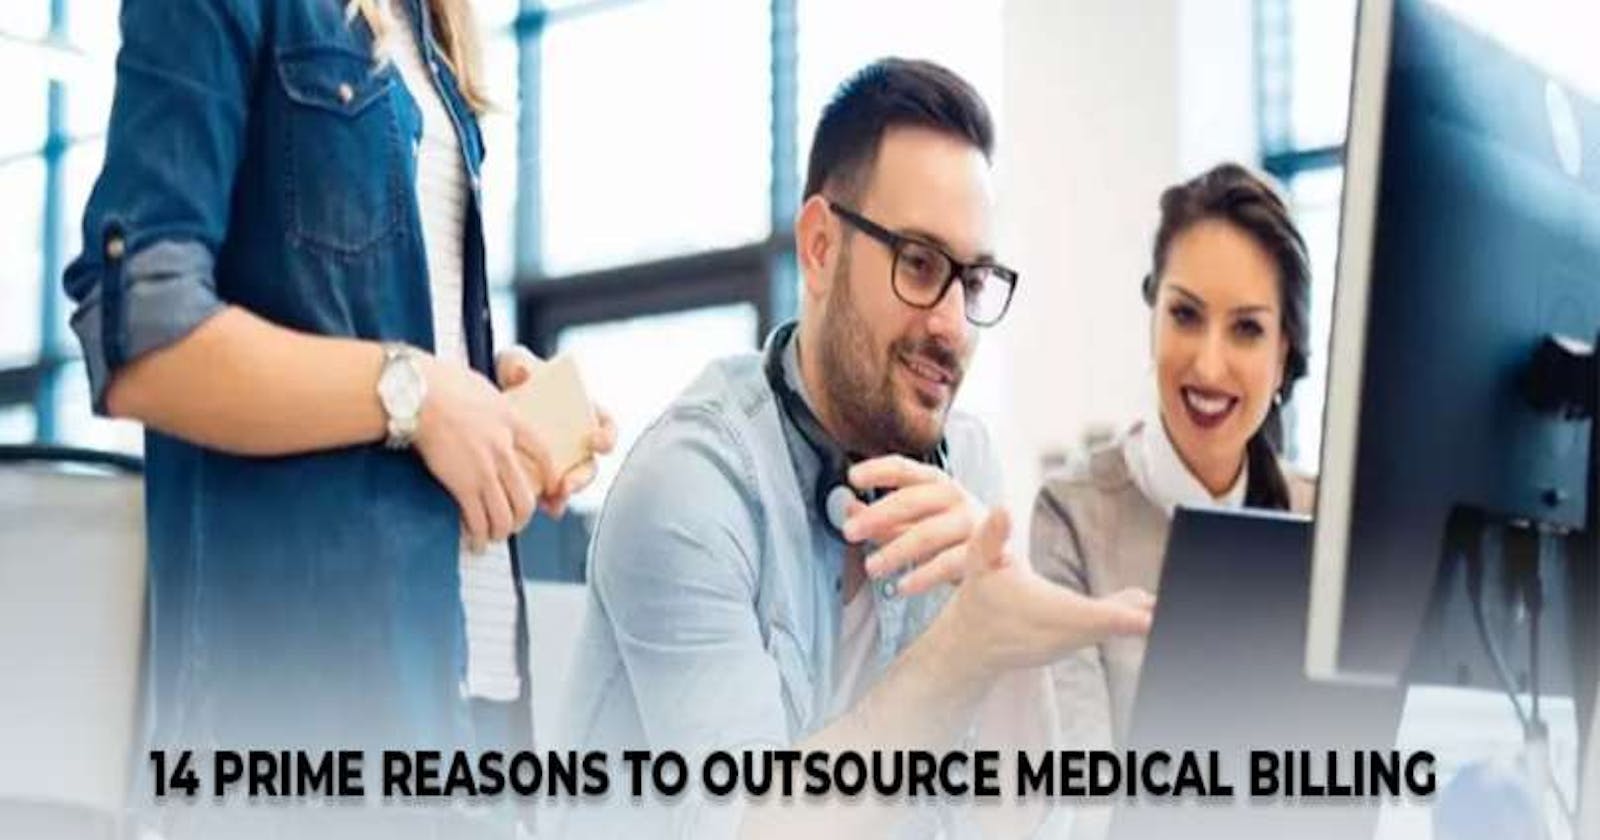 Prime Reasons to Outsource Medical Billing